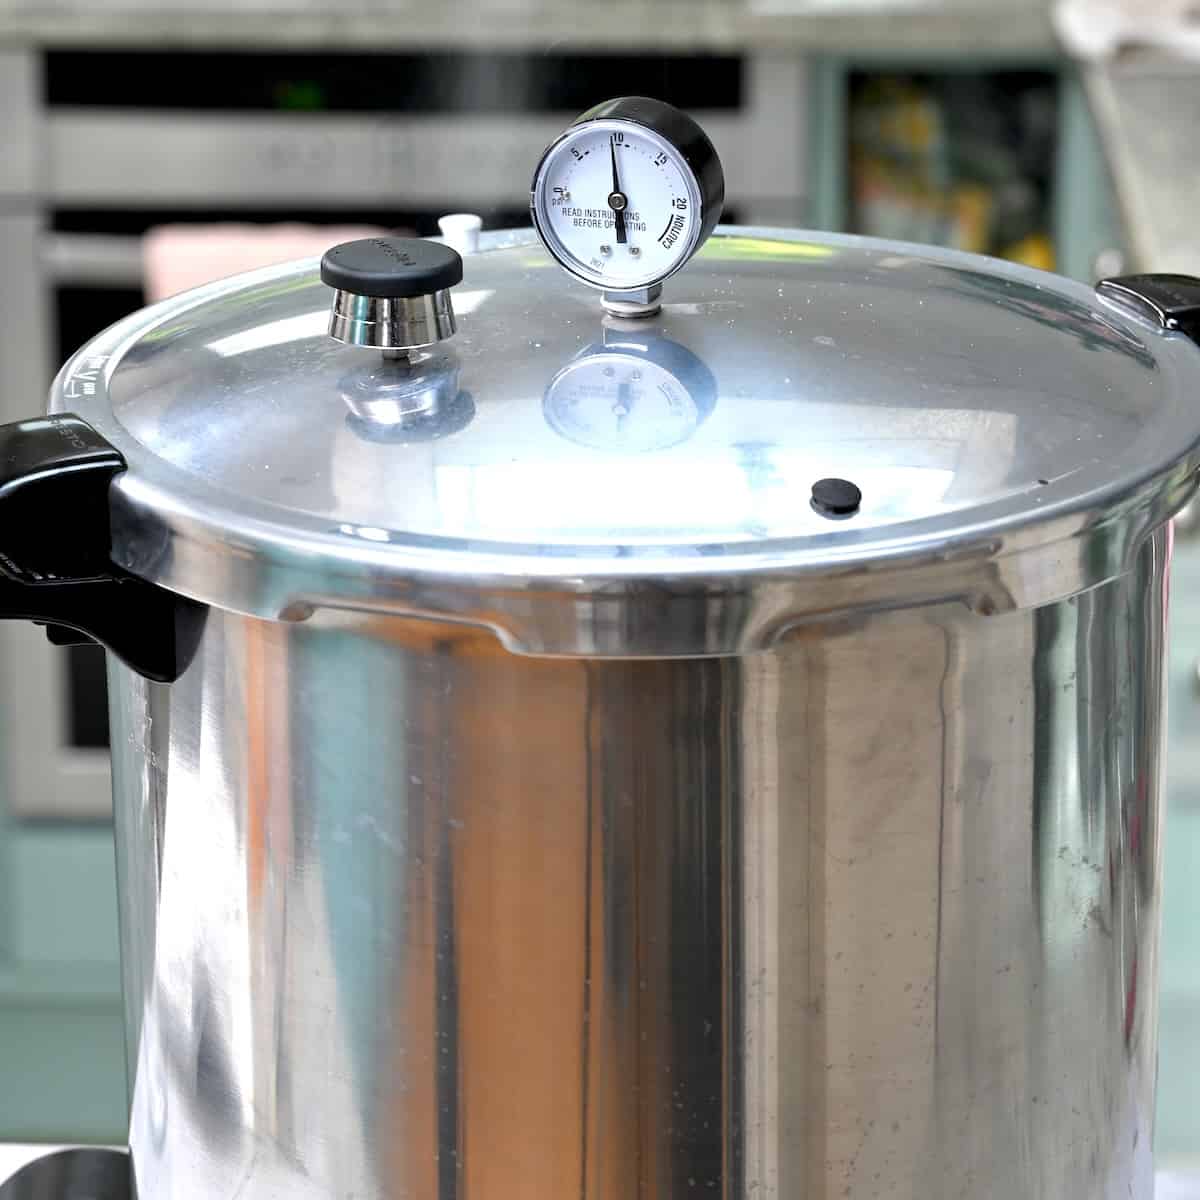 A pressure canner being heated